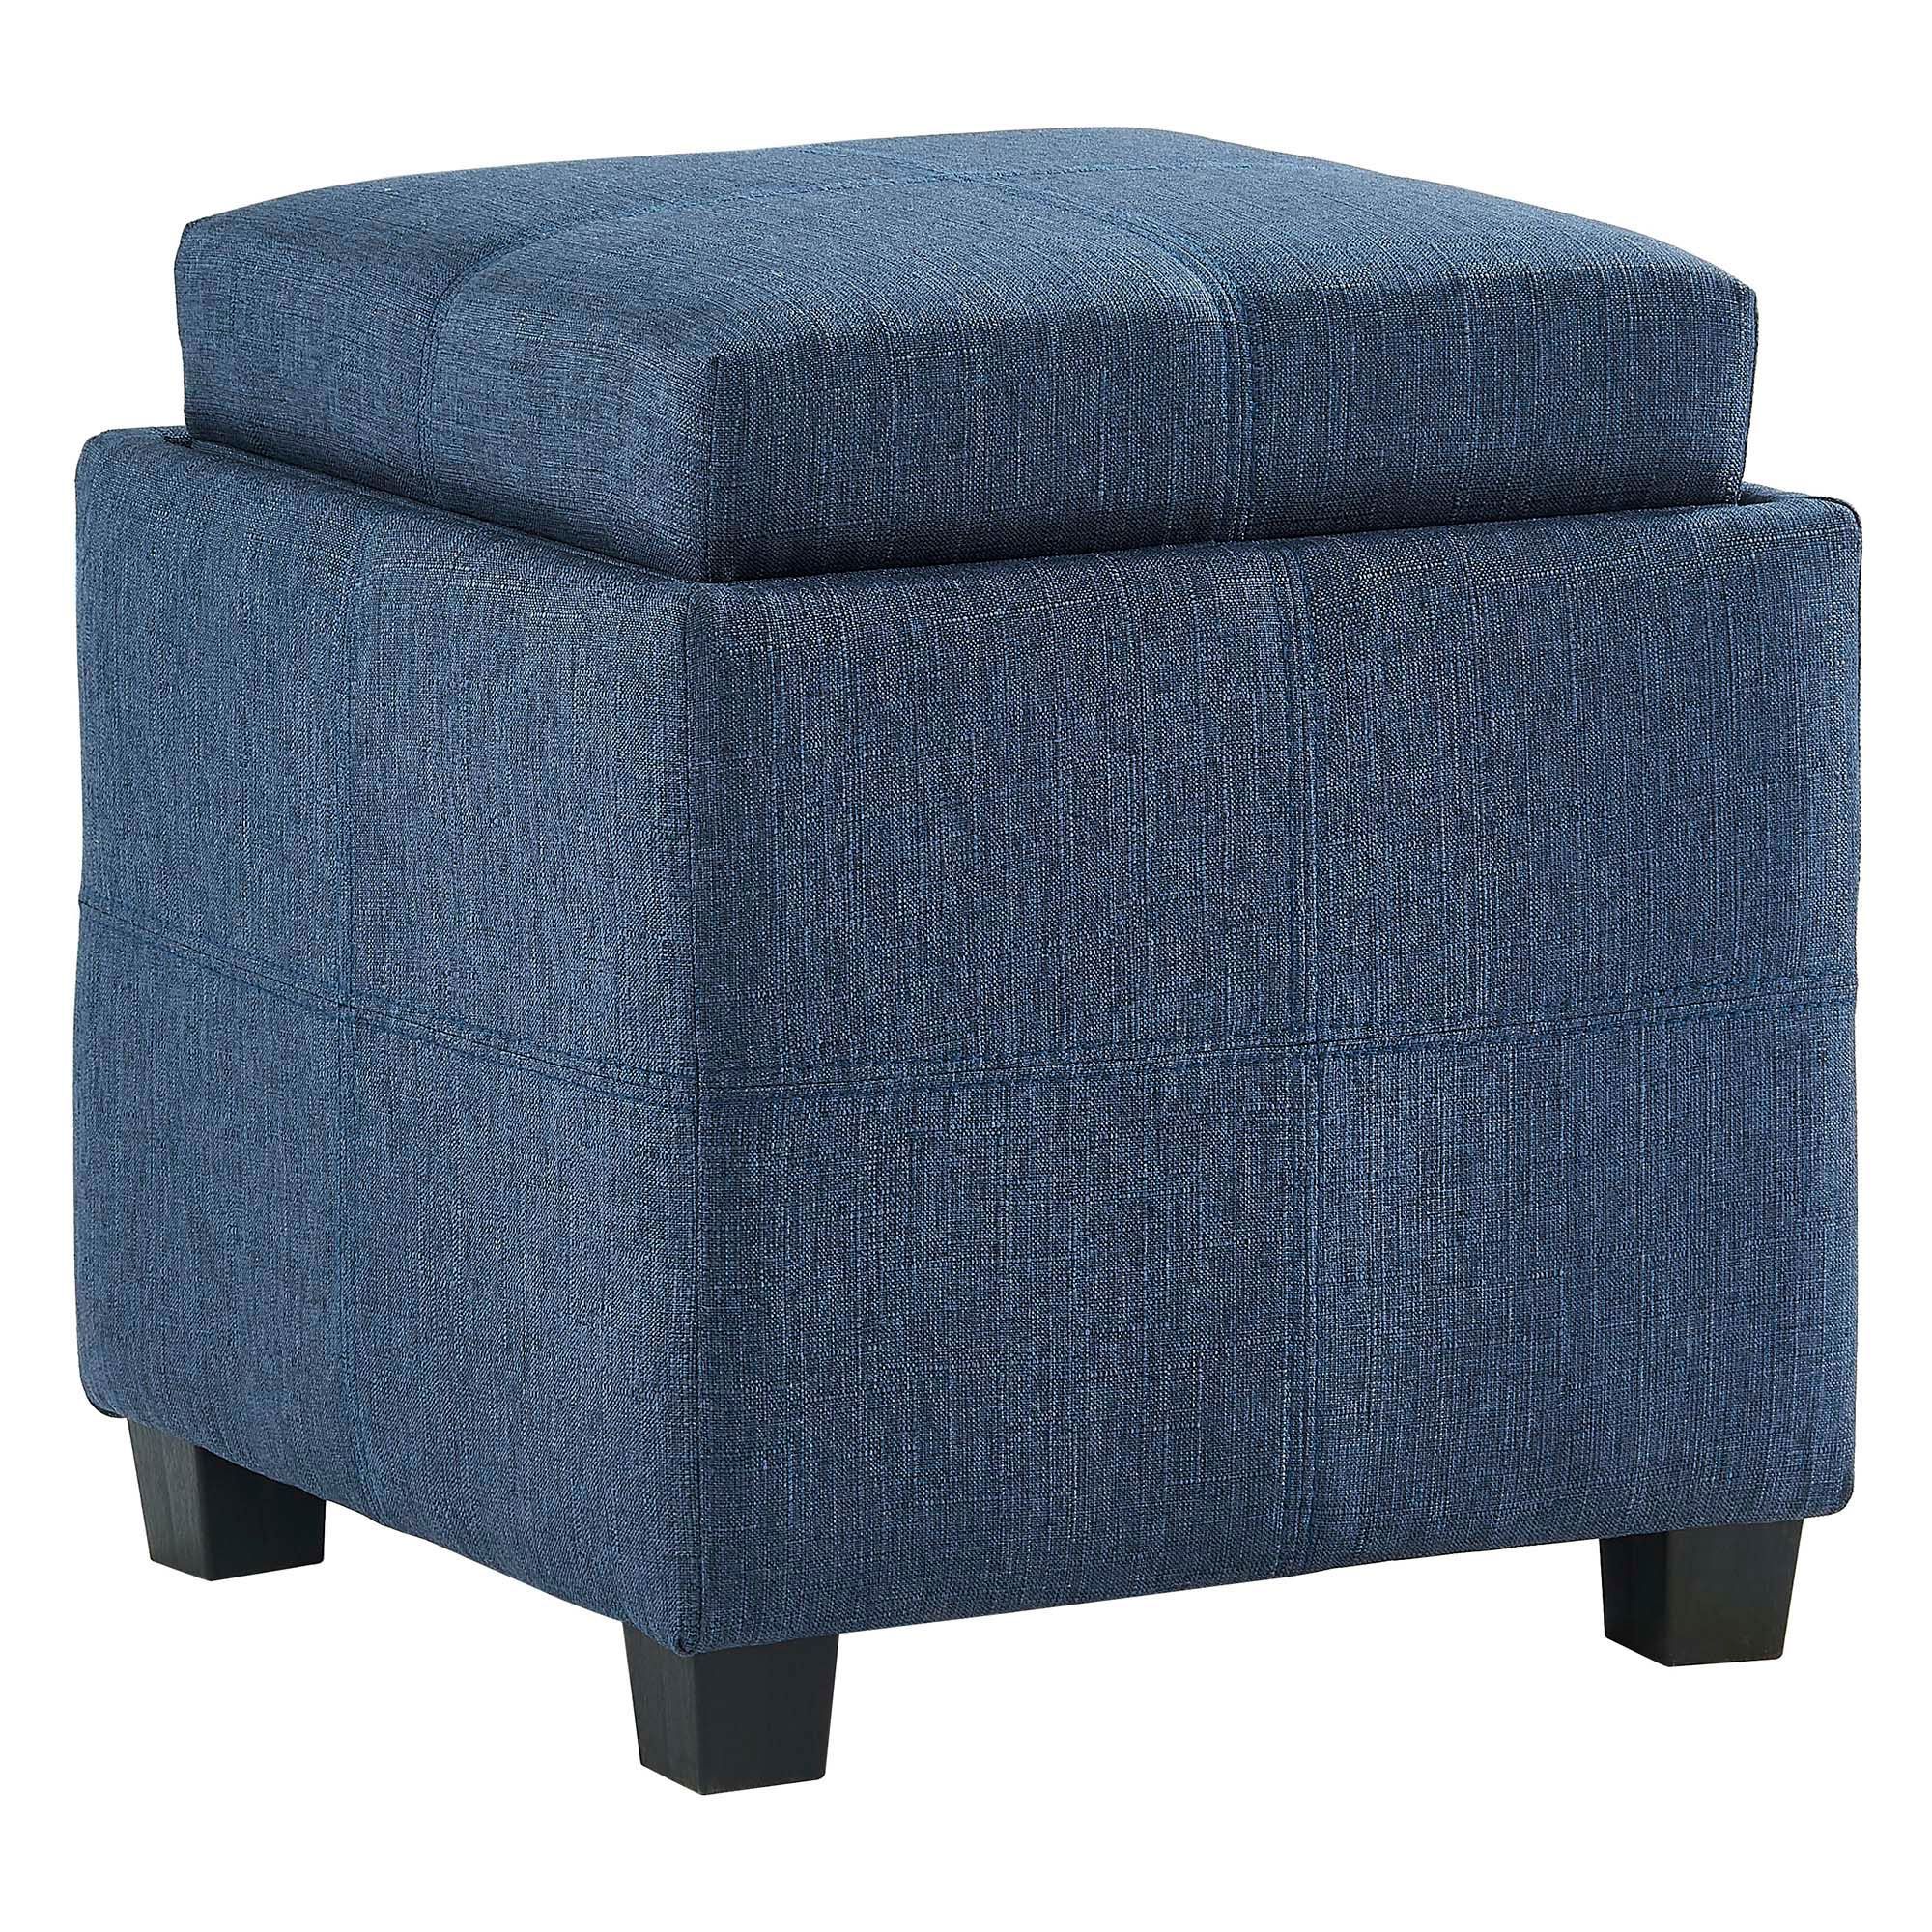 Most Recently Released Blue Fabric Nesting Ottomans Set Of 2 In 19" Blue And Gray Transitional Square Storage Ottoman With Reversible (View 6 of 10)